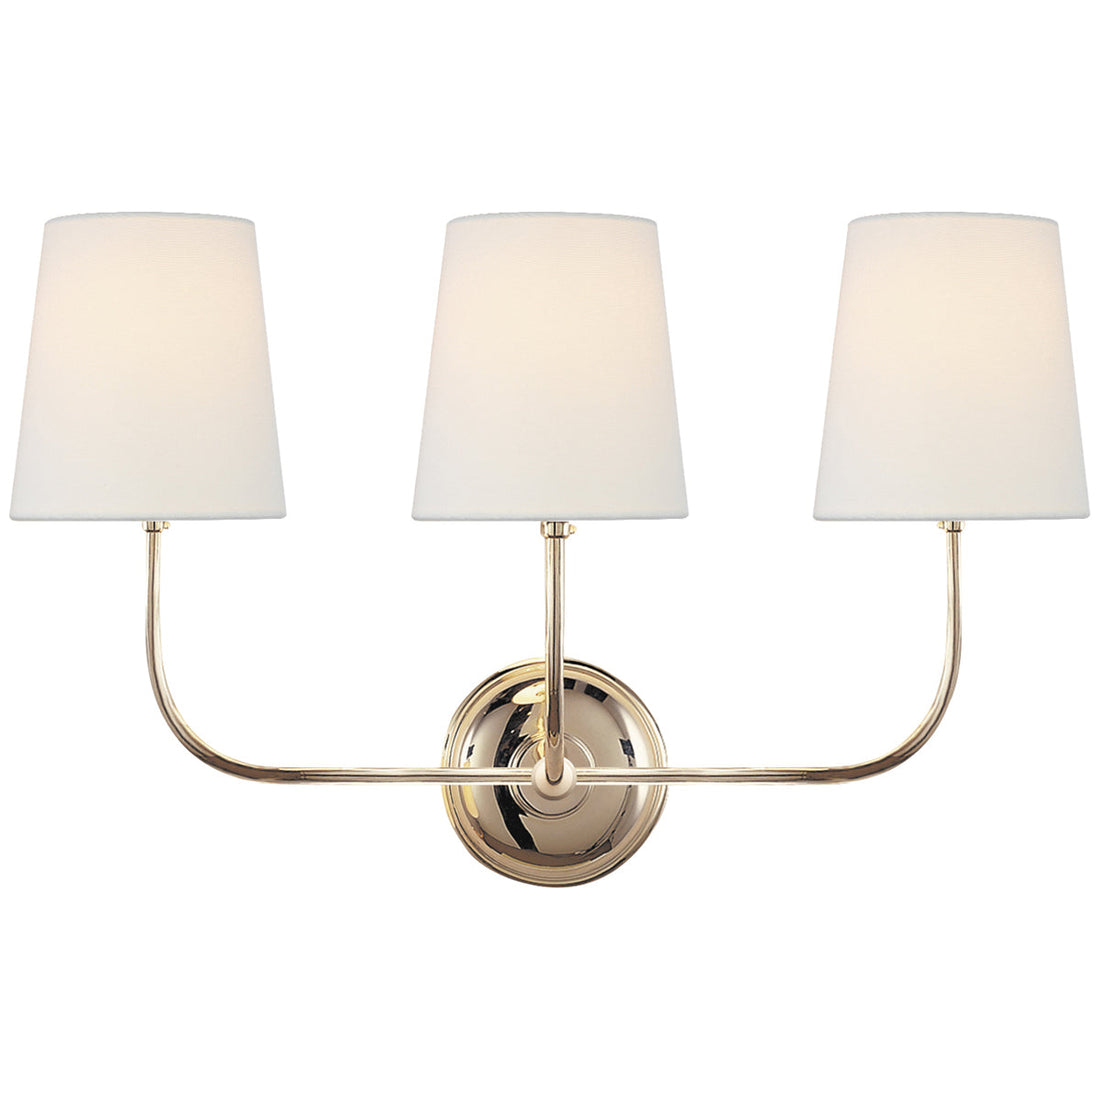 Visual Comfort Vendome Triple Sconce with Linen Shade